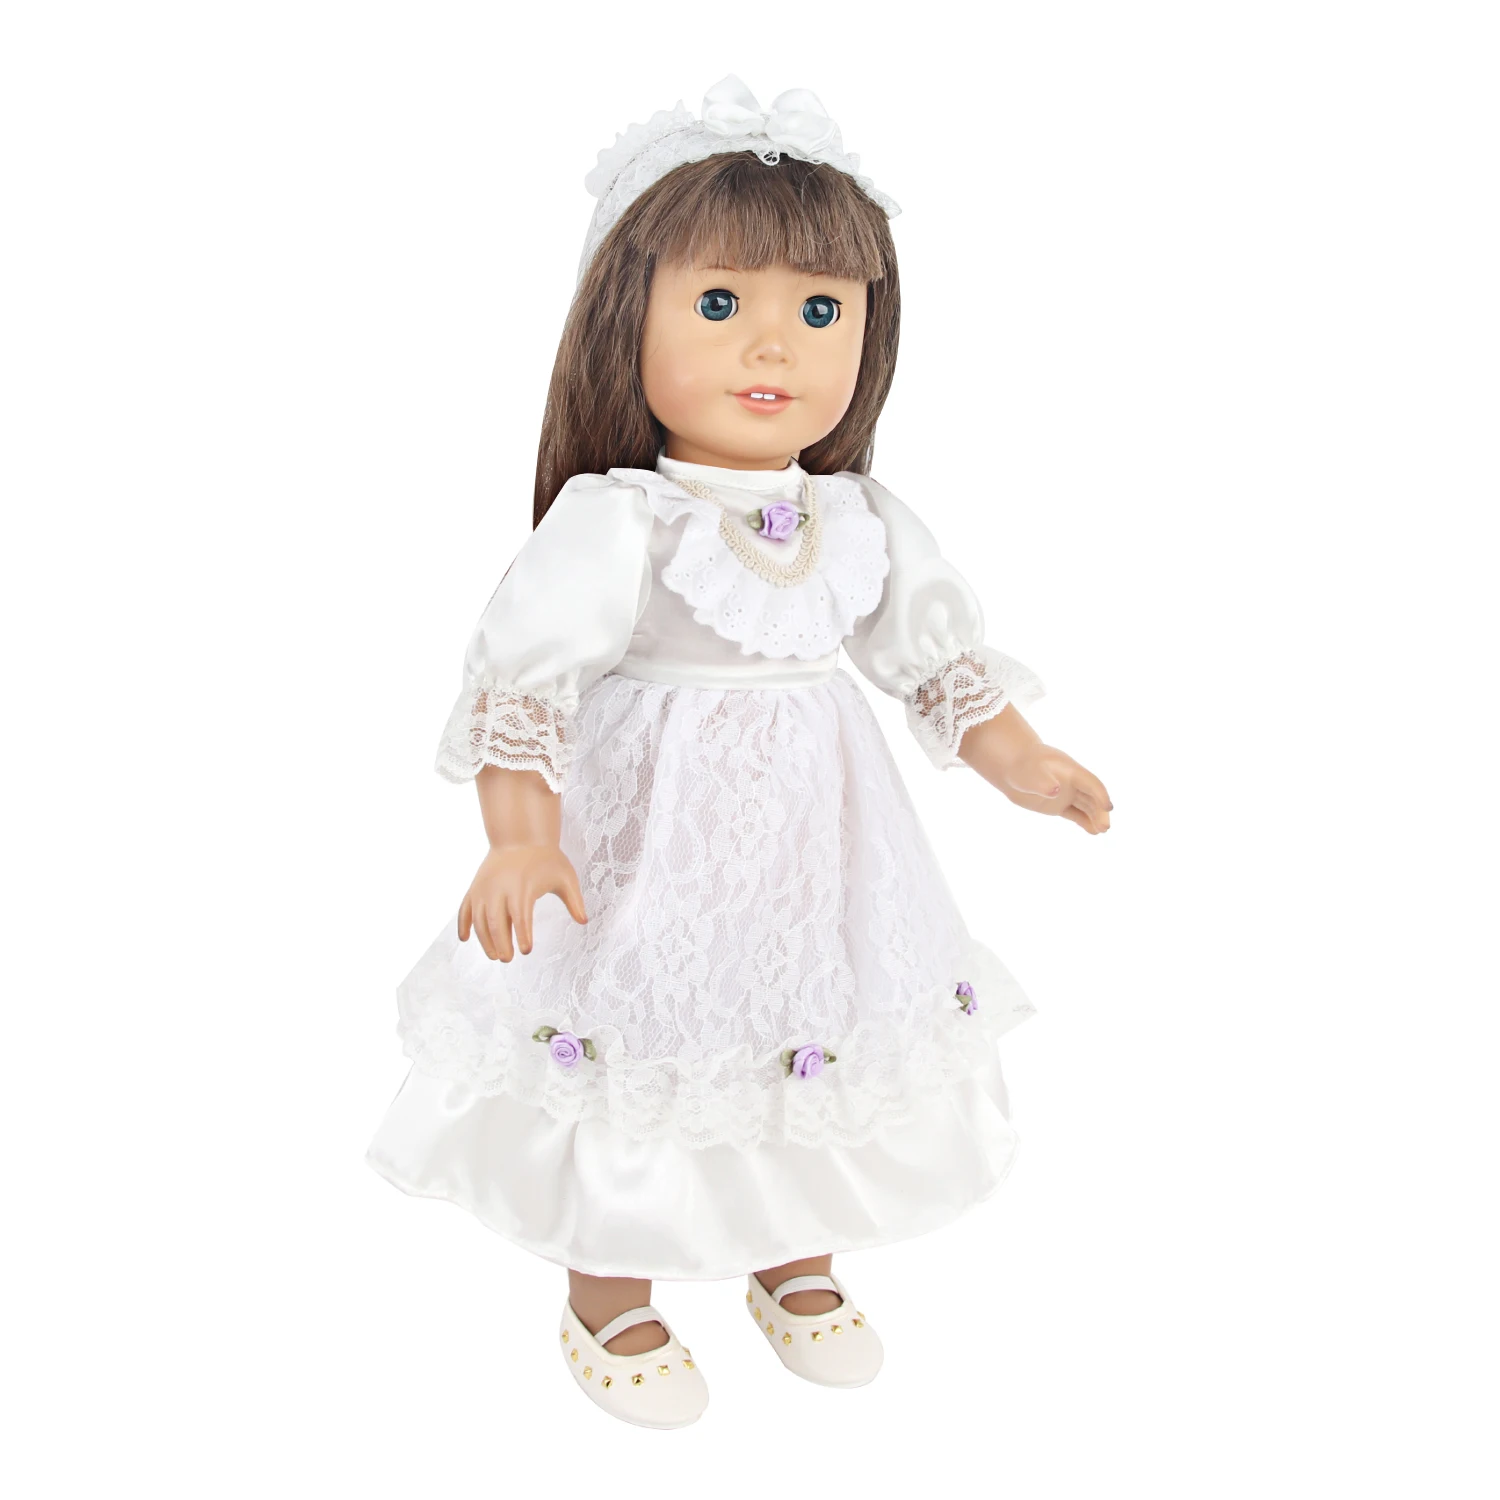 New Baby Doll Clothes Doll white Lace skirt For 45cm Baby Dolls